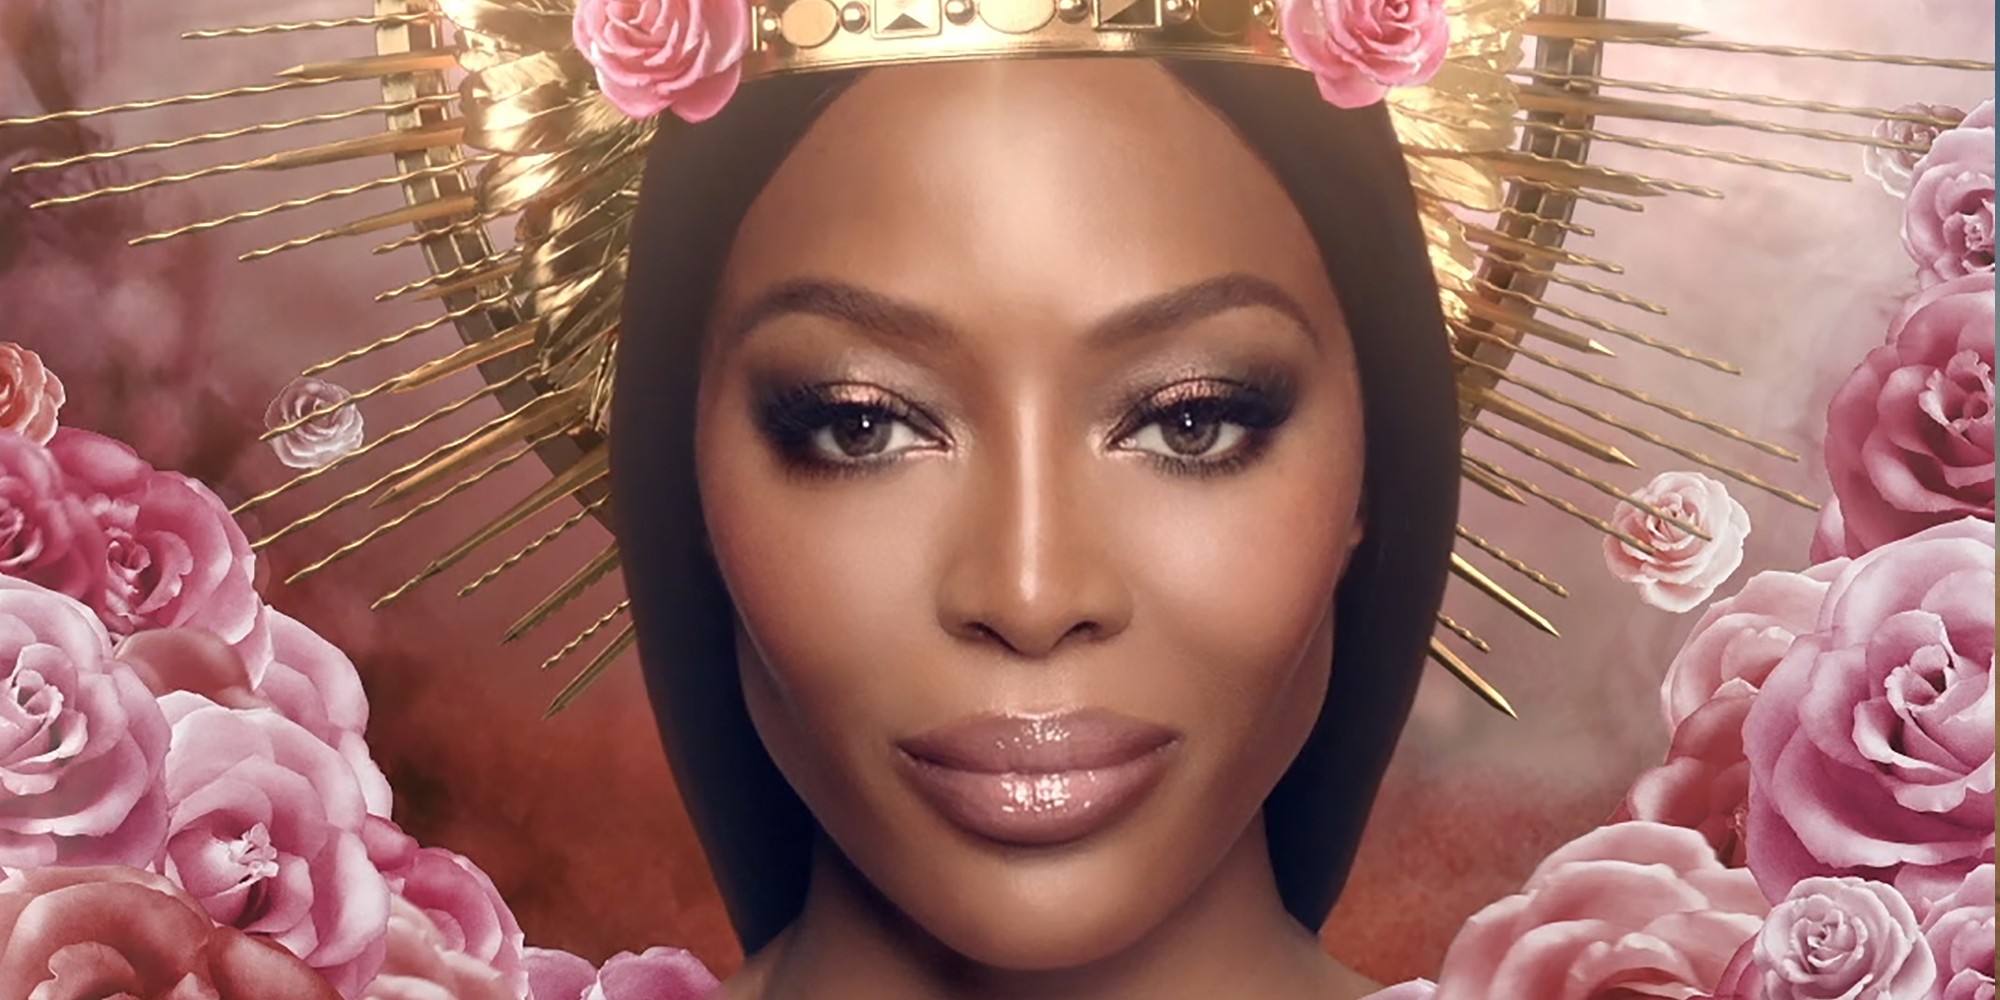 PAT MCGRATH LABS 'DIVINE ROSE' AD CAMPAIGN FEATURING FIRST GLOBAL FACE NAOMI CAMPBELL